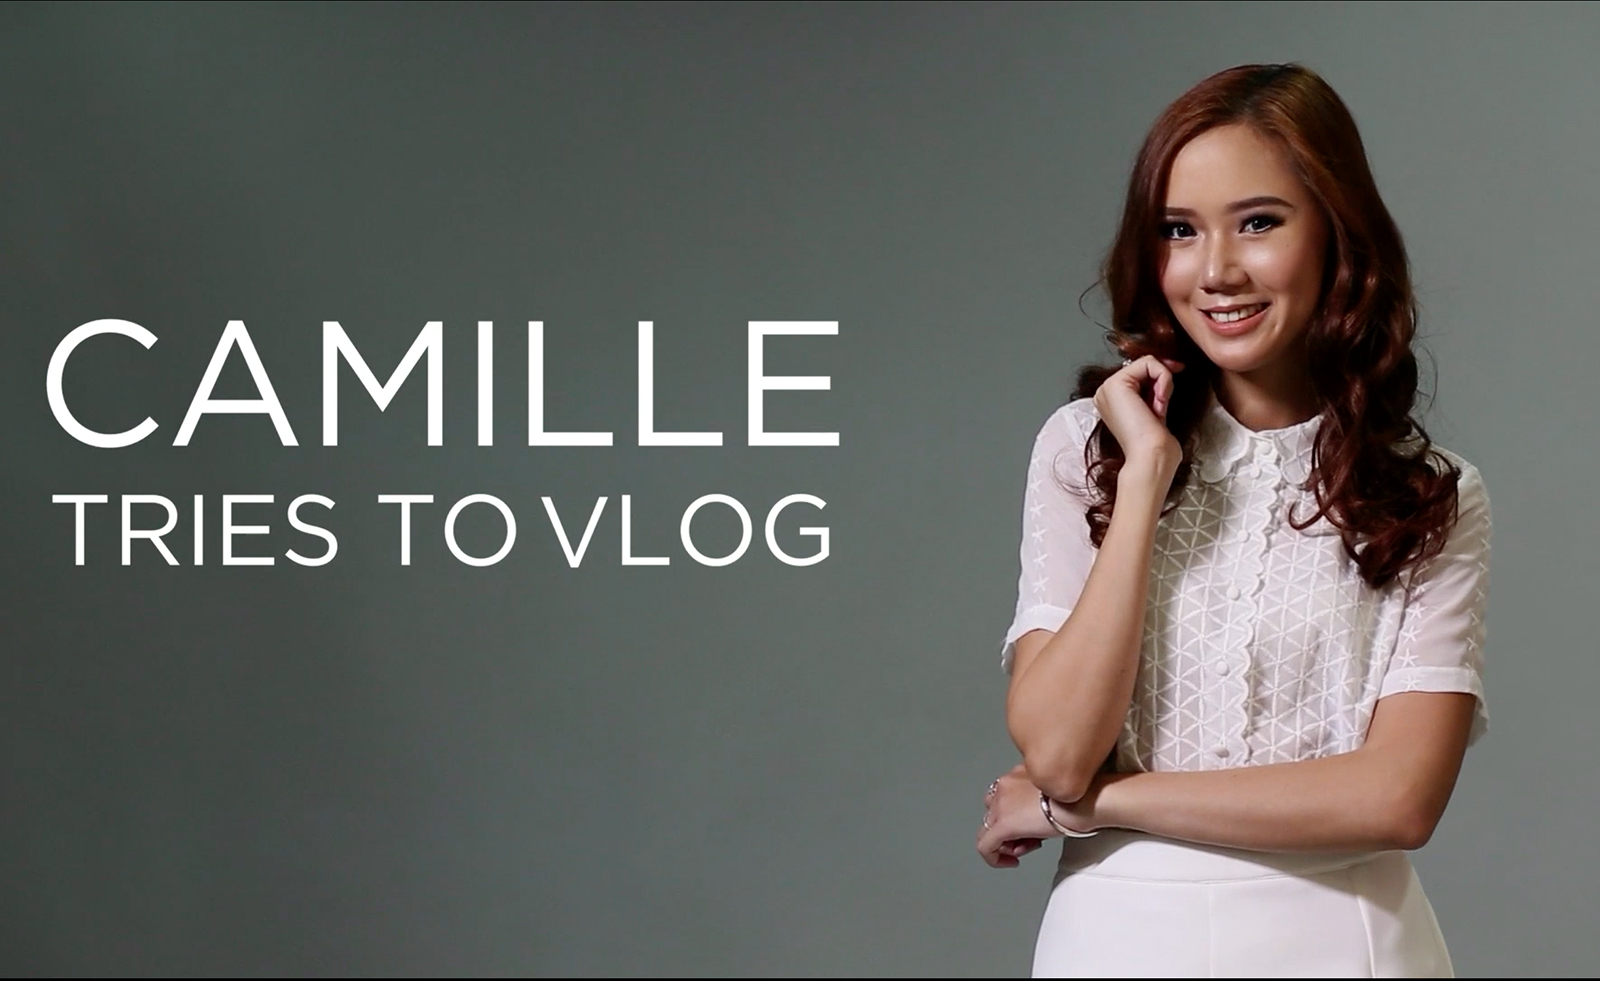 Camille Tries To Vlog - www.itscamilleco.com